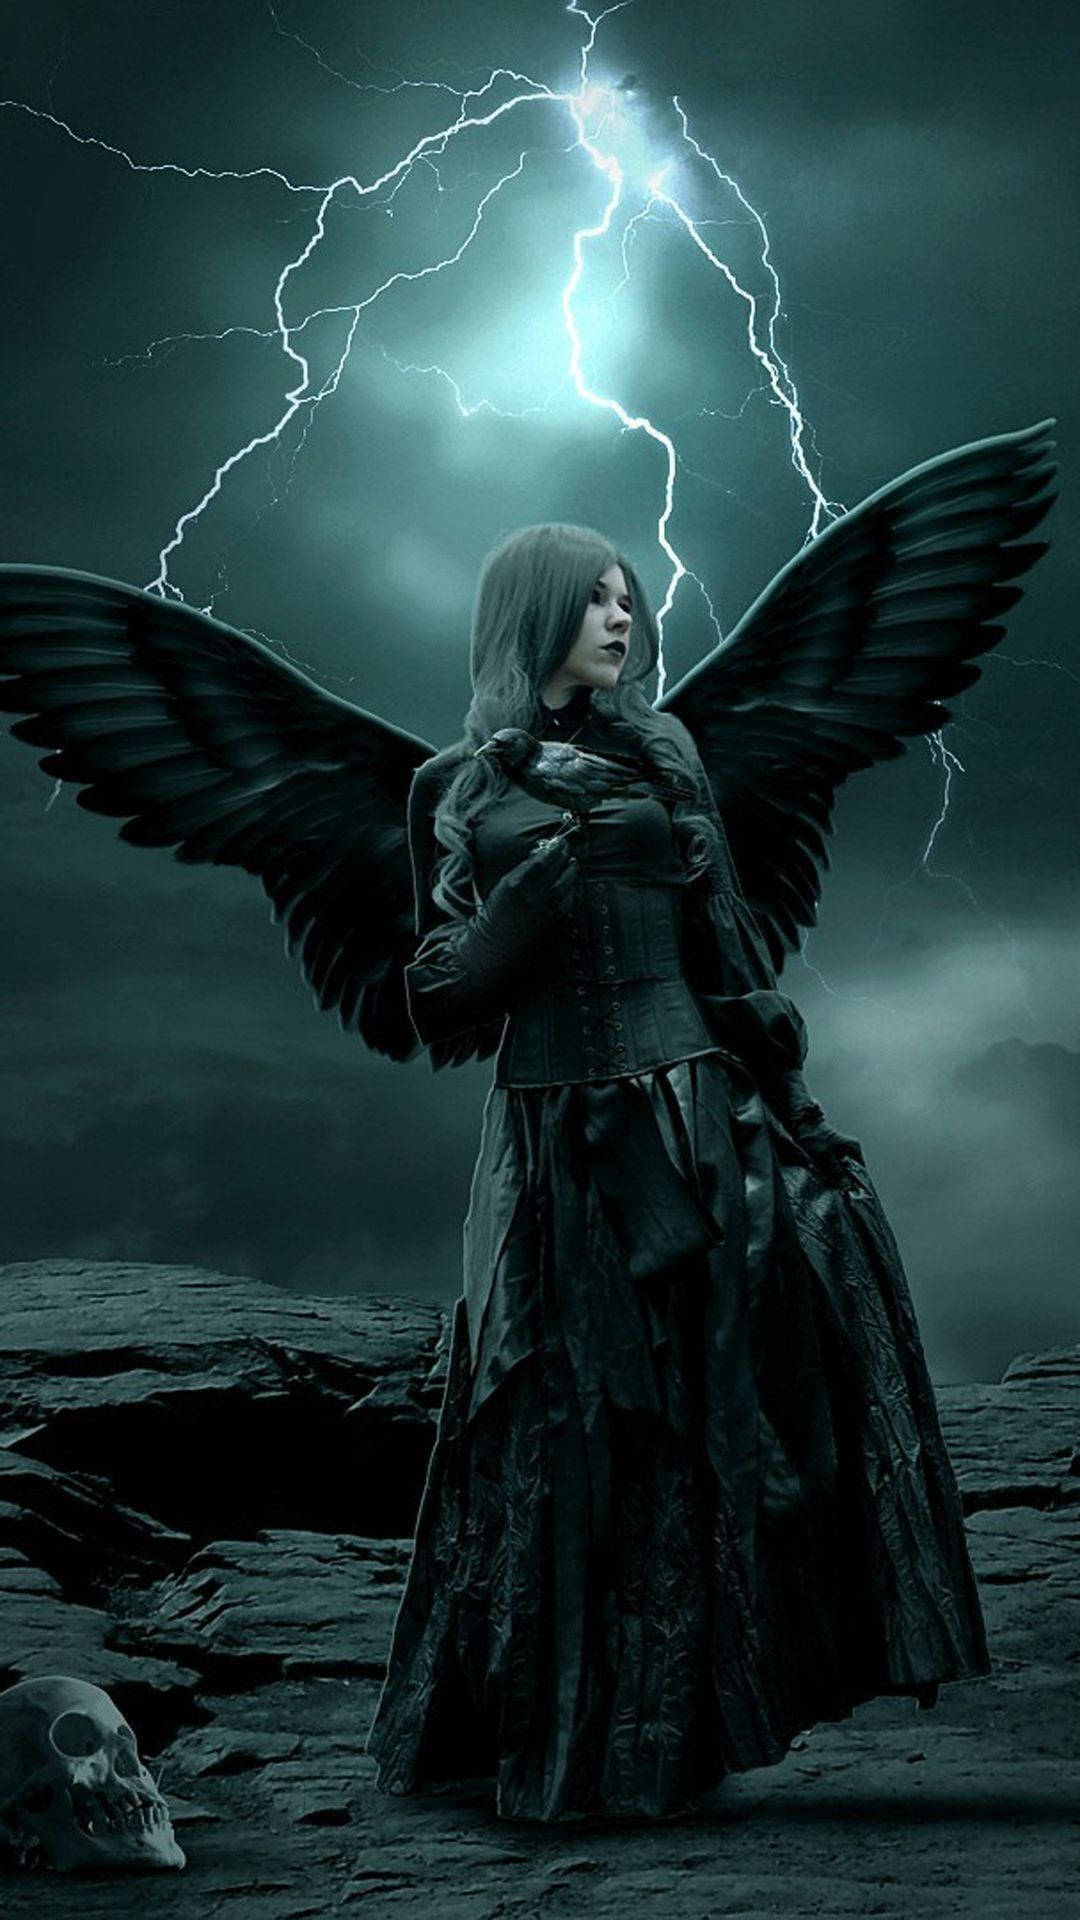 A Woman In Black With Wings Standing In Front Of A Storm Wallpaper